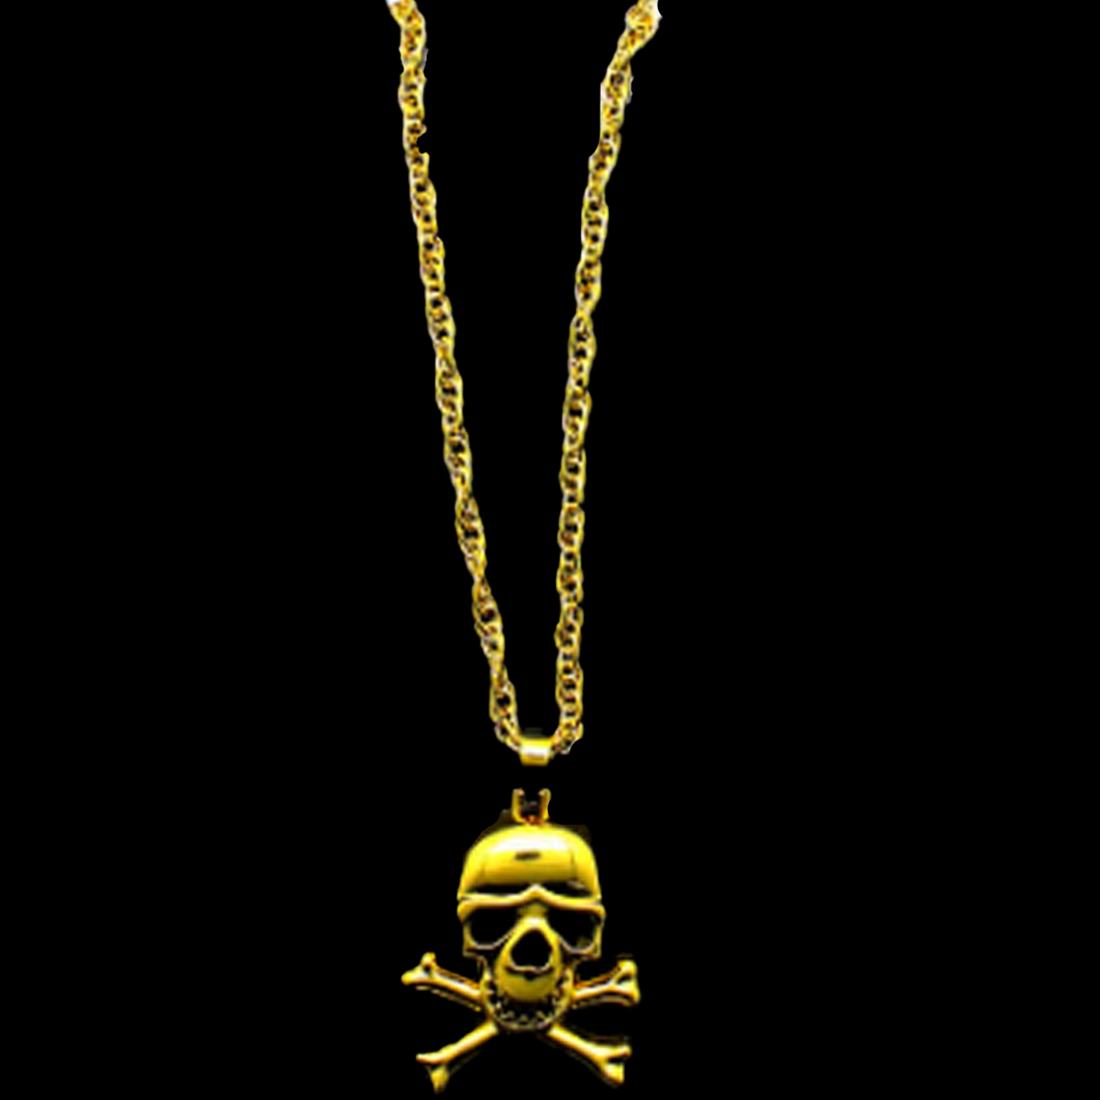 Pirate Gold Skull and Crossbones Necklace